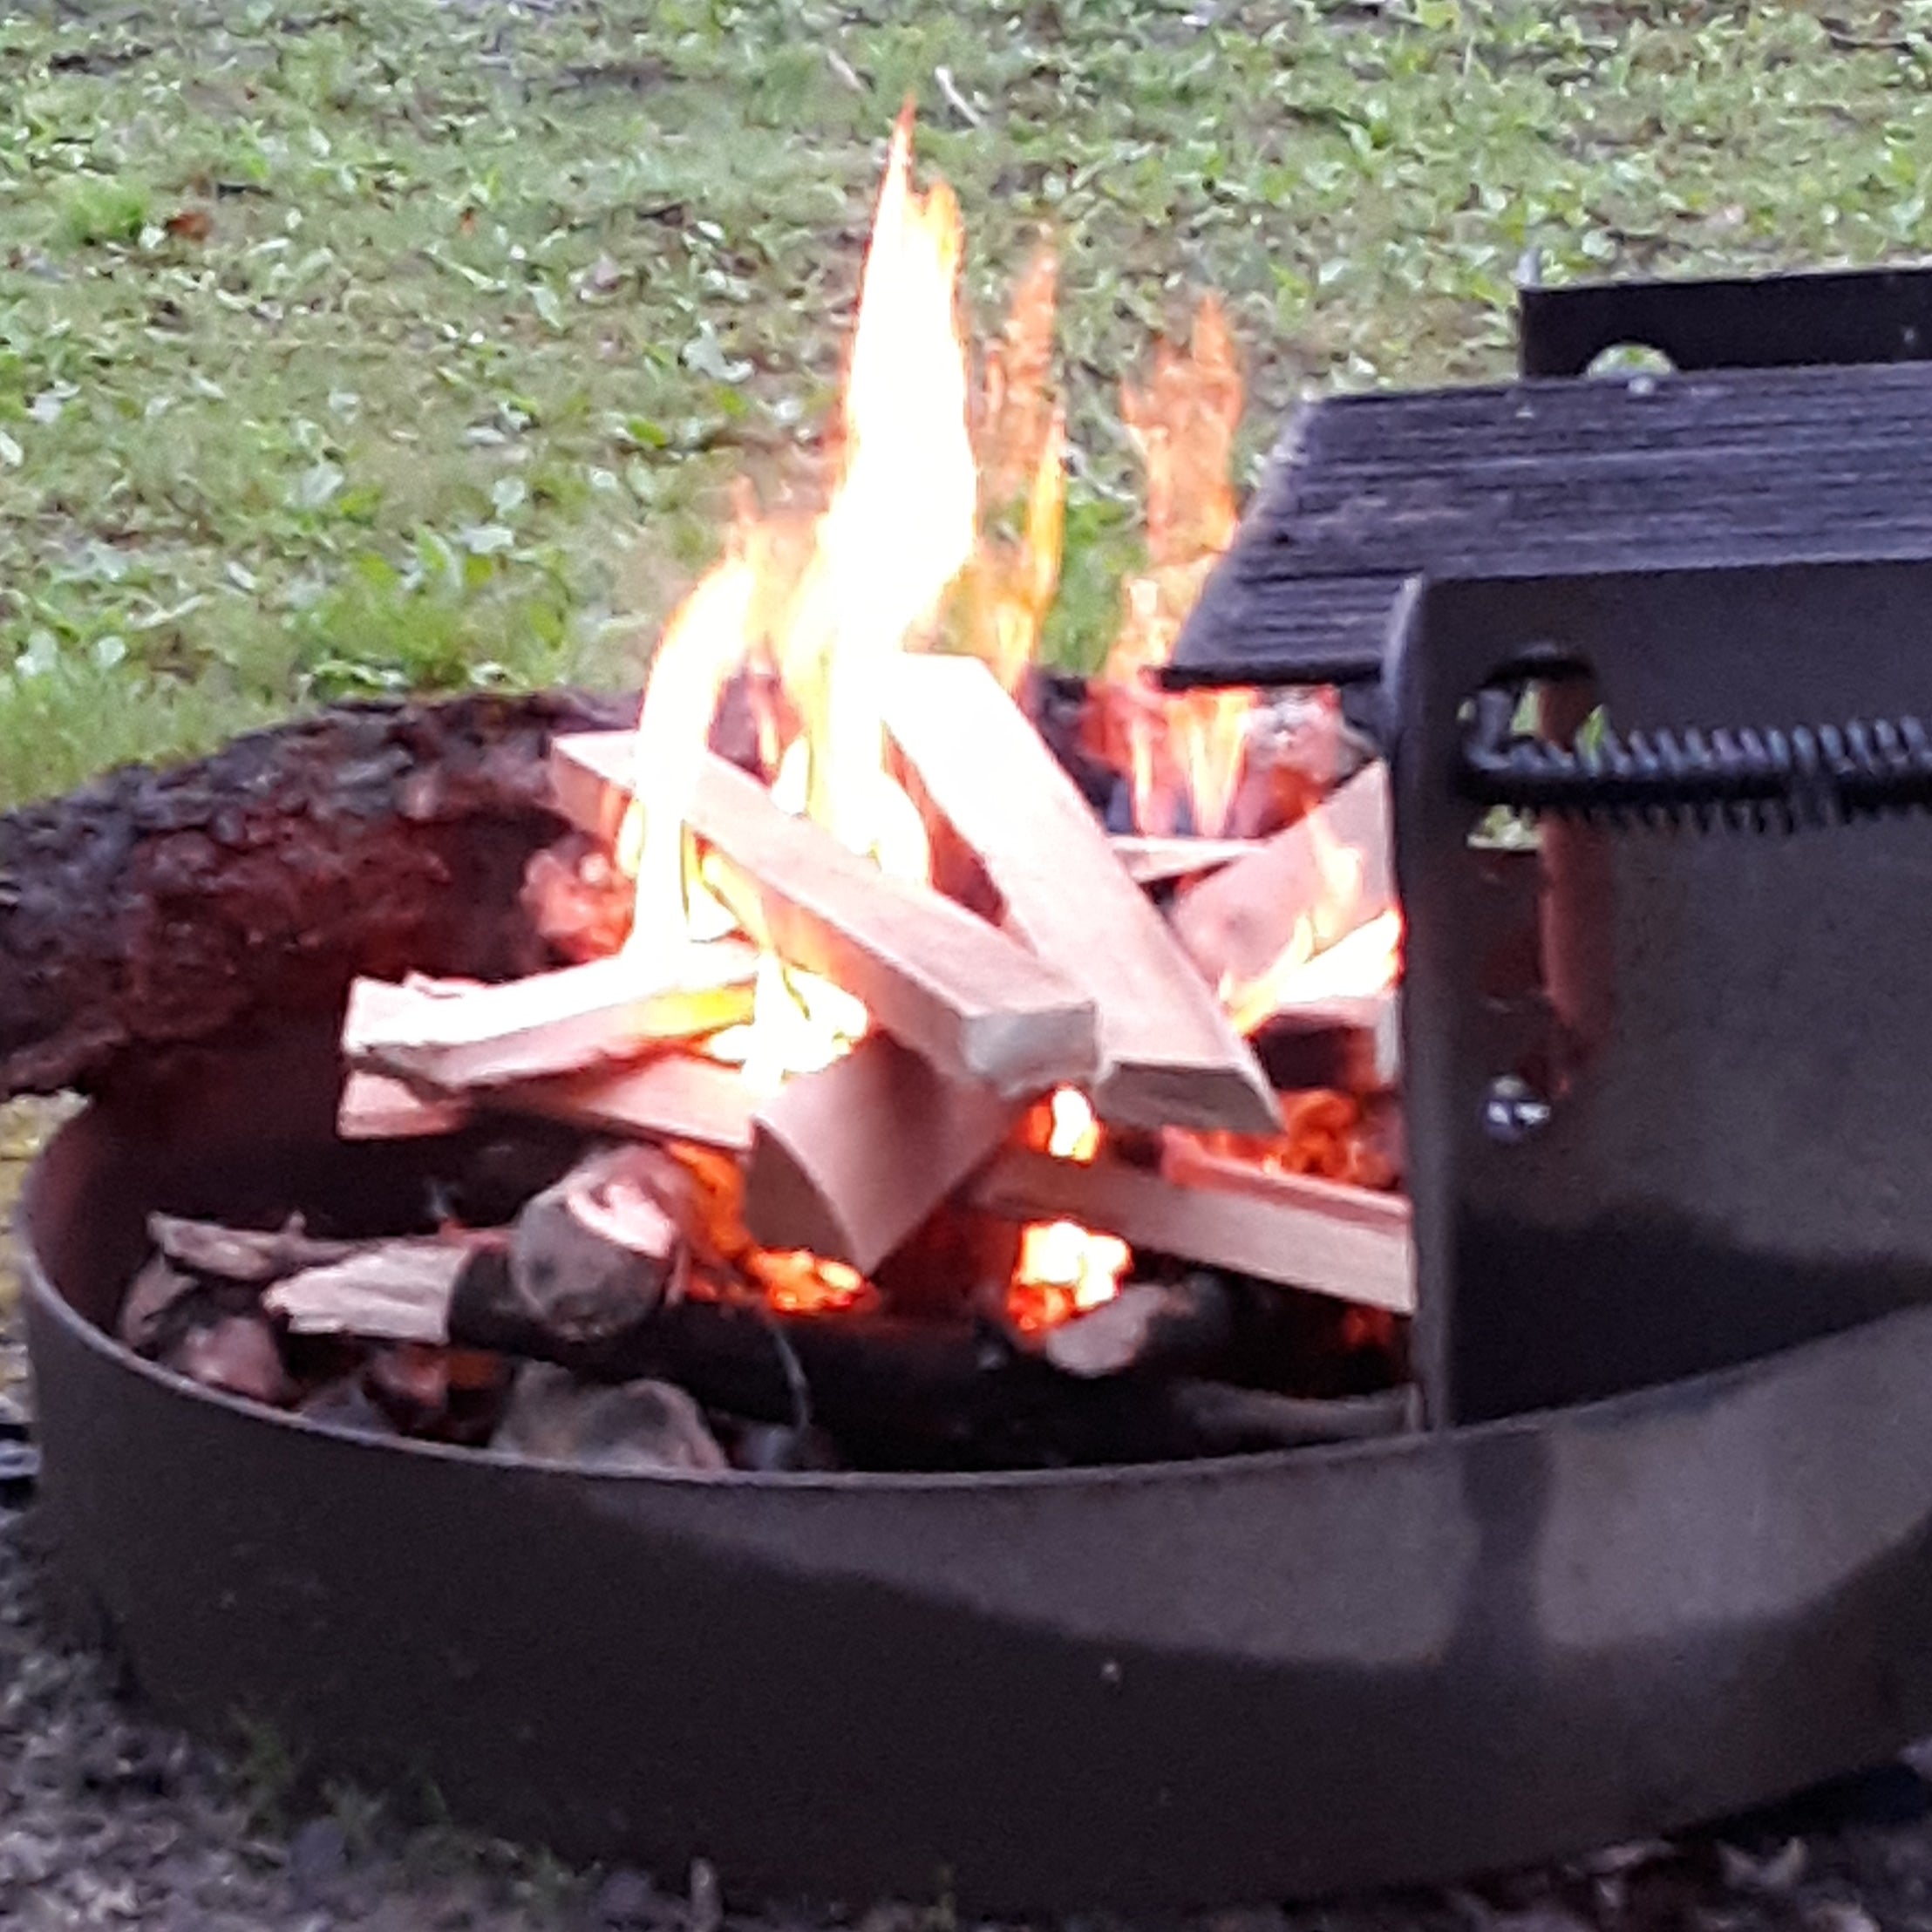 When the grill rack is lowered, it tilts into the fire